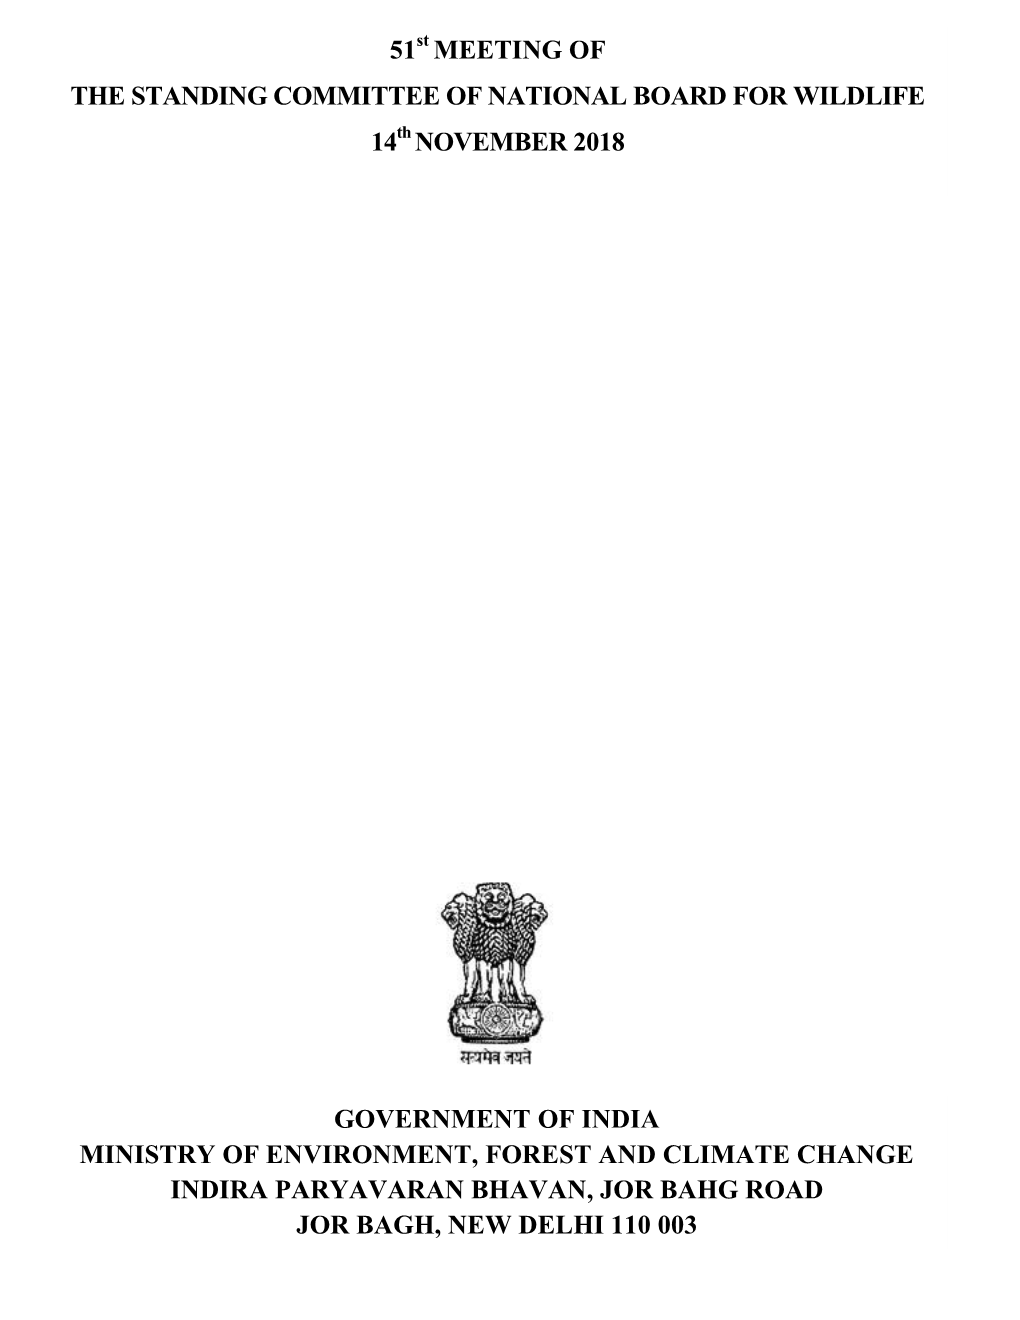 GOVERNMENT of INDIA MINISTRY of ENVIRONMENT, FOREST and CLIMATE CHANGE INDIRA PARYAVARAN BHAVAN, JOR BAHG ROAD JOR BAGH, NEW DELHI 110 003 1 | P a G E